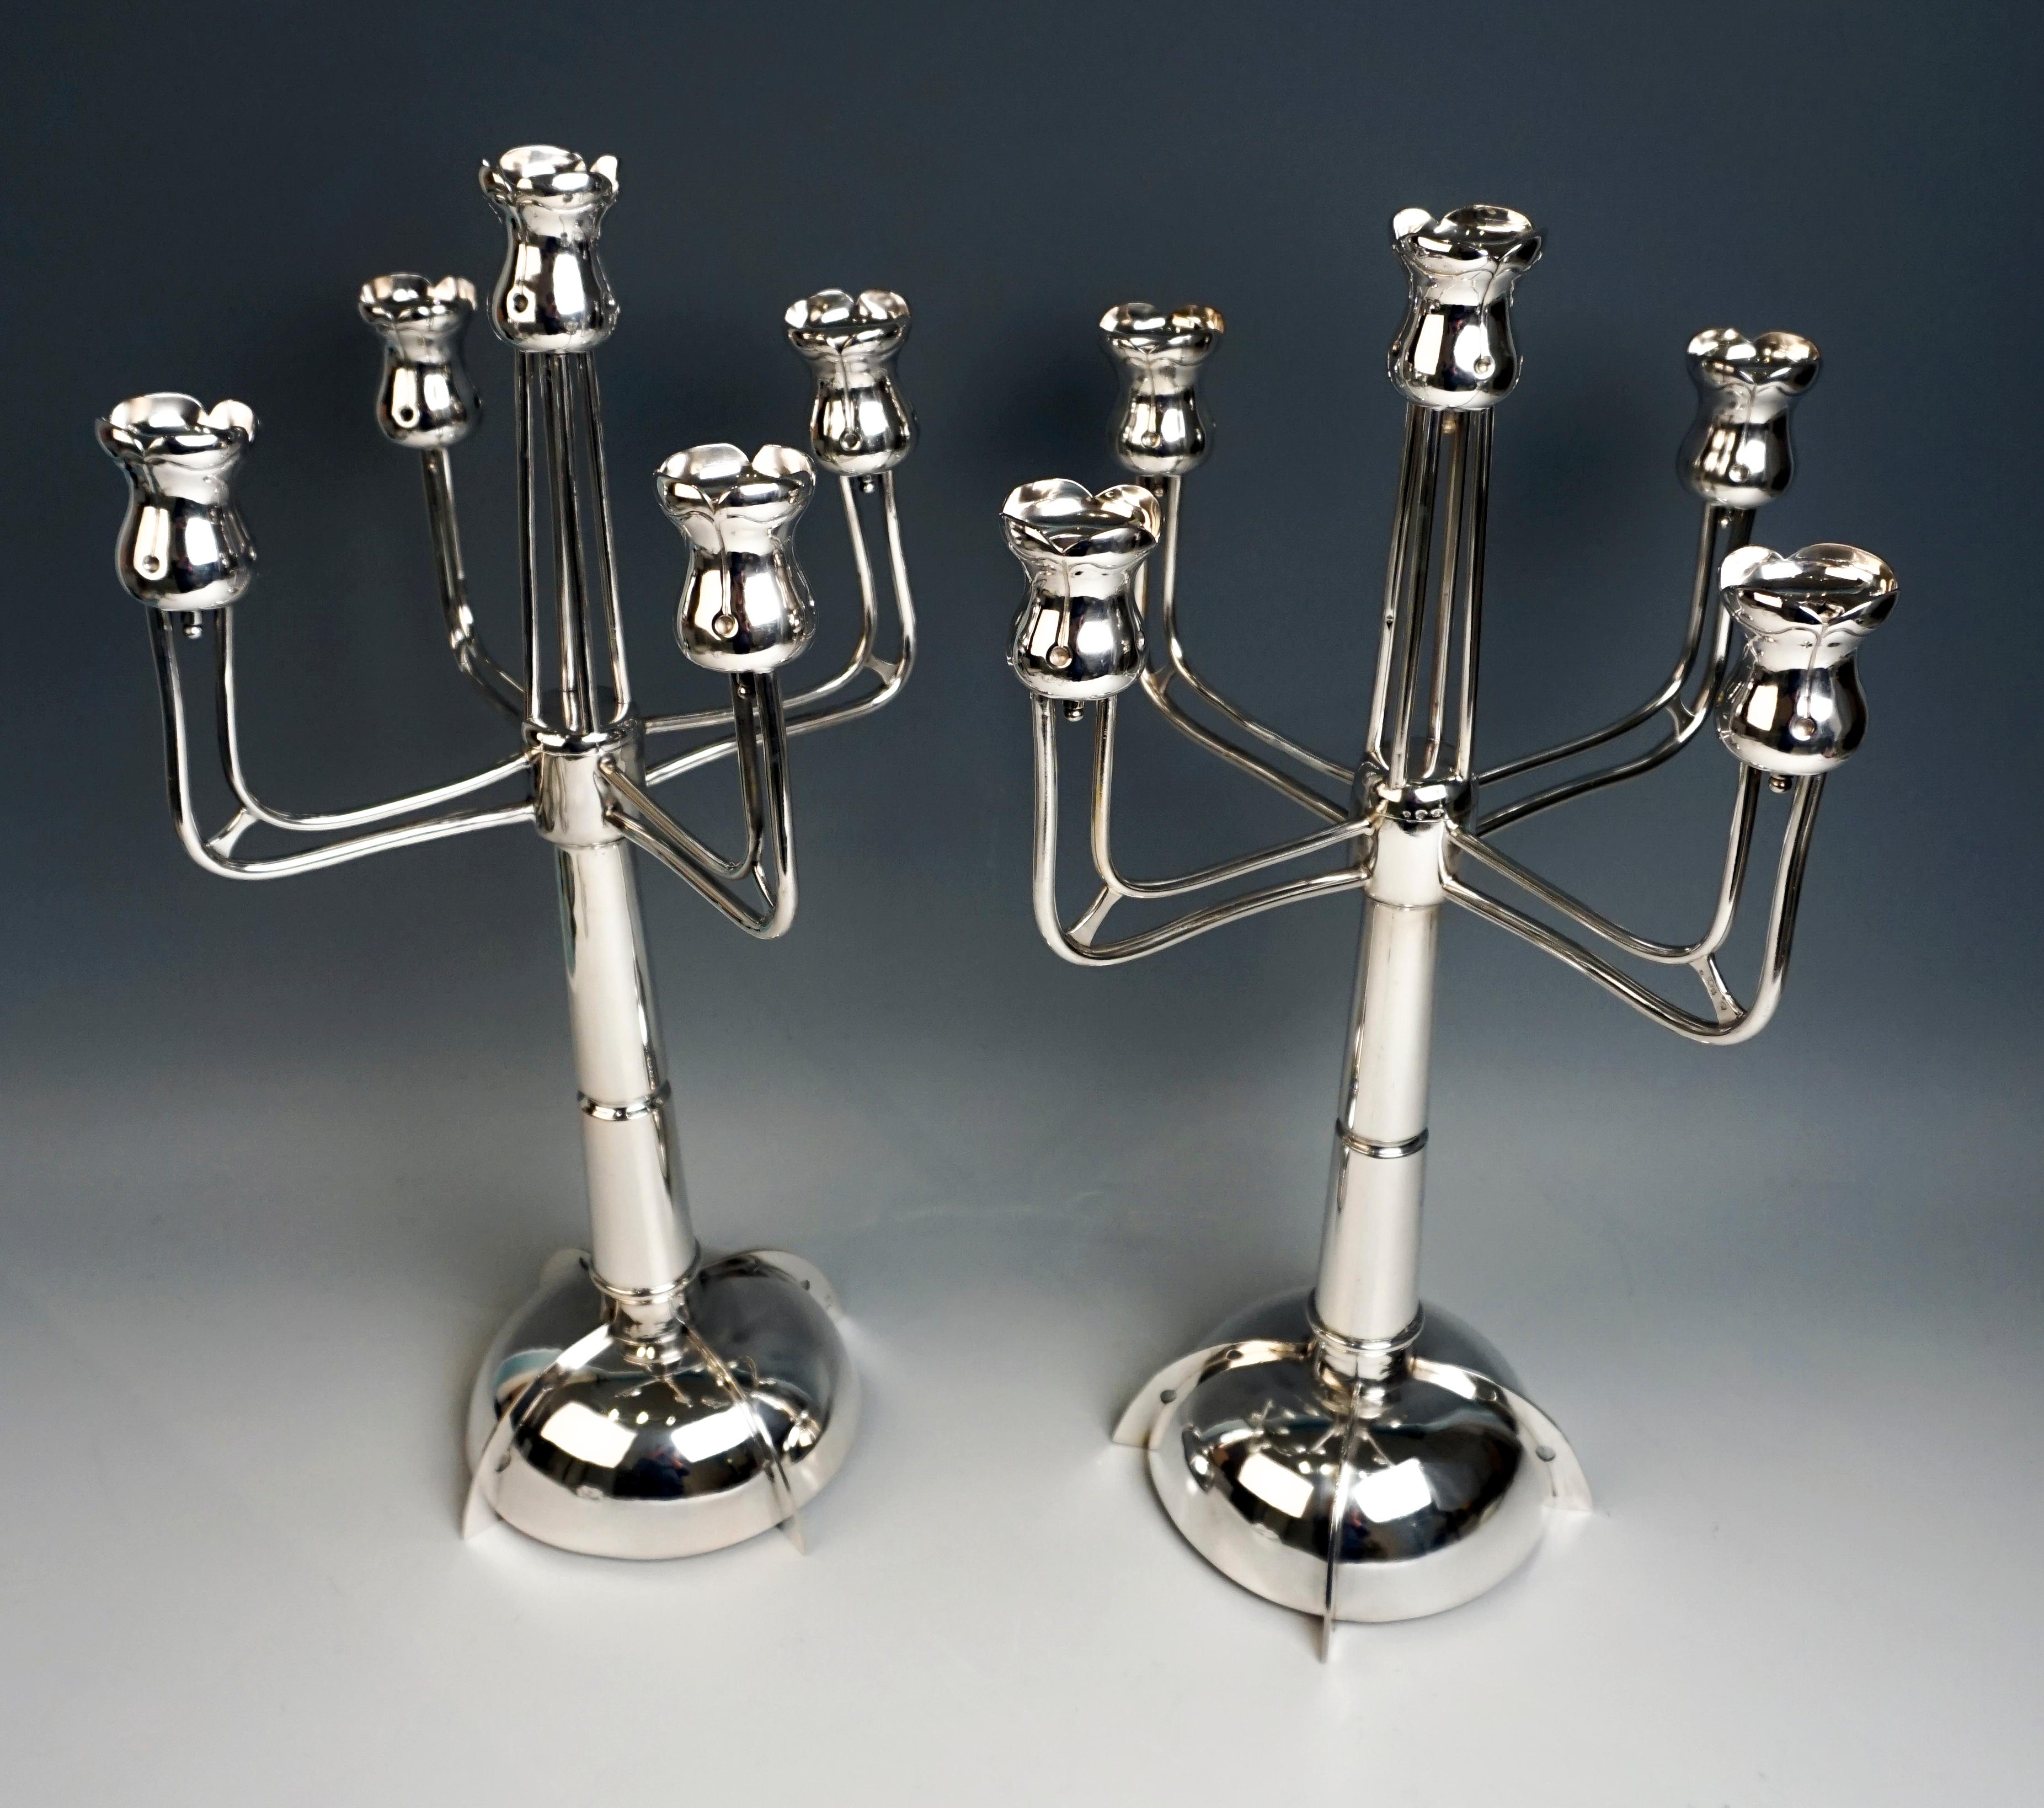 Two extraordinary five-light candelabra from the time of the Vienna Secession

Made circa 1910
Branded by the Viennese official hallmark 1872-1922 / Diana's head and different Austro-Hungarian Hallmarks
Master's mark: 'EK' for Emil